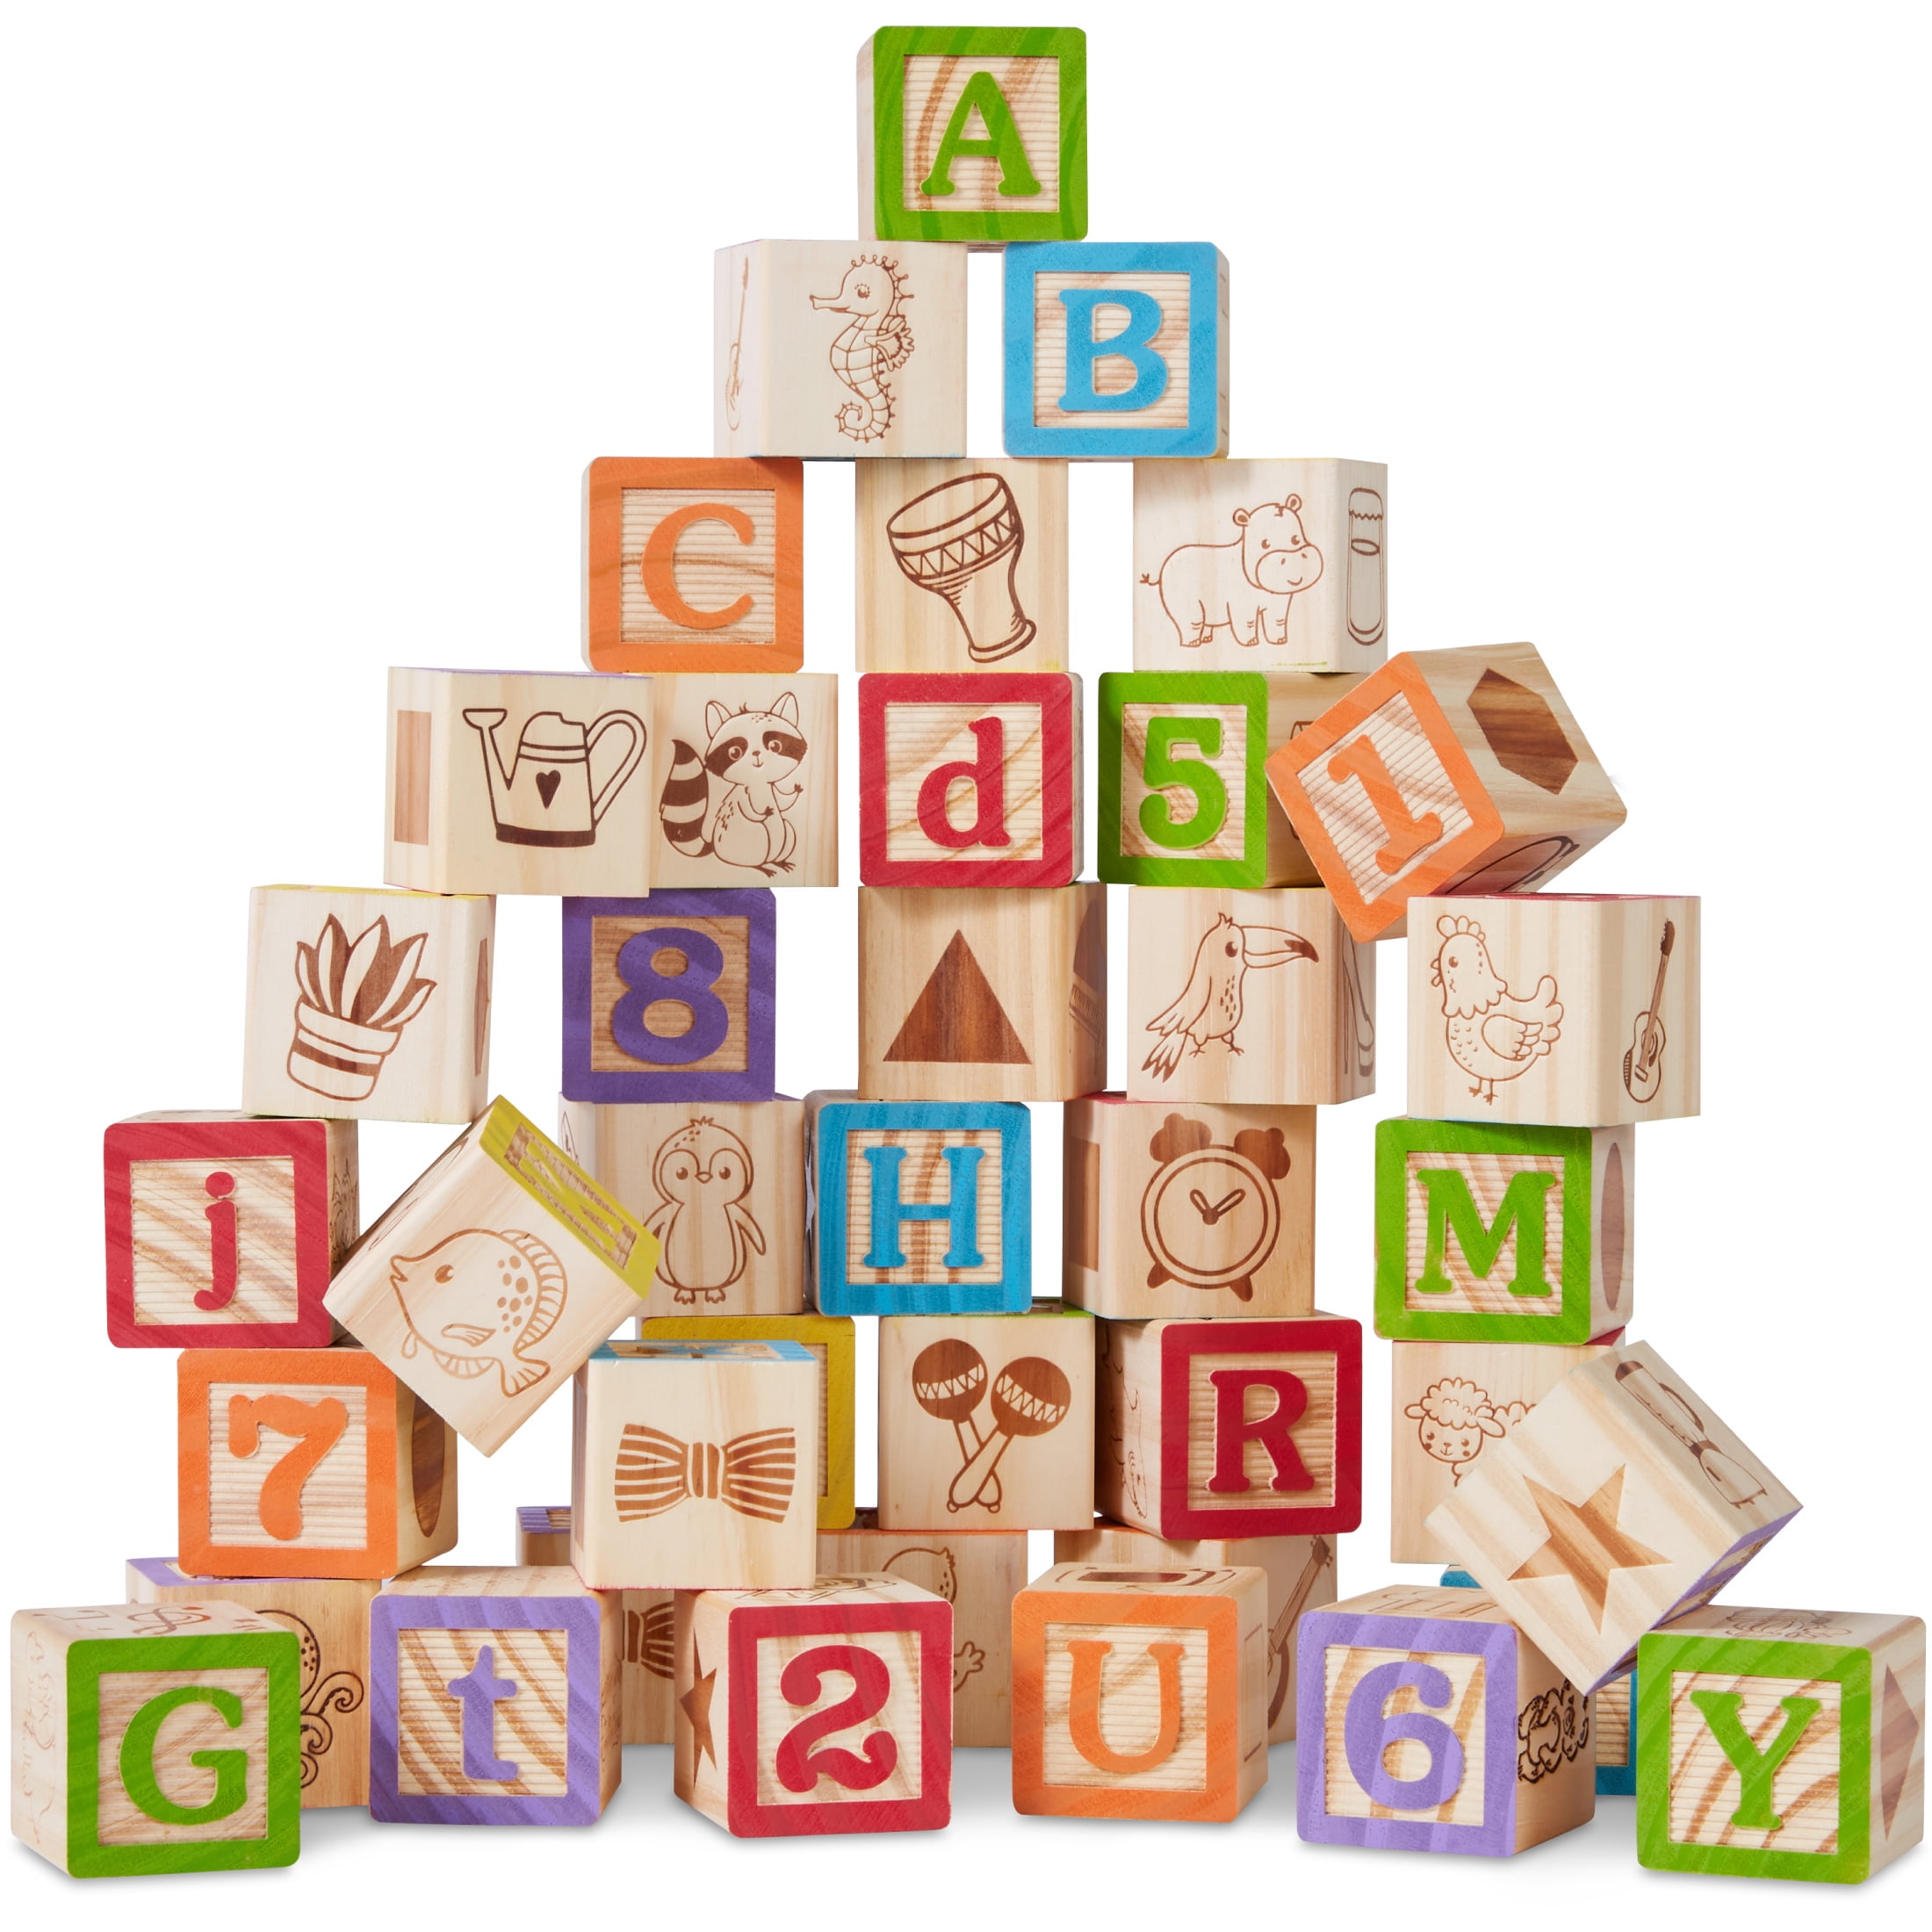 Best Choice Products 40-Piece Kids Wooden ABC Block Set Building Education Construction Alphabet Letters & Stem Toy for Toddlers w/ Carrying Case